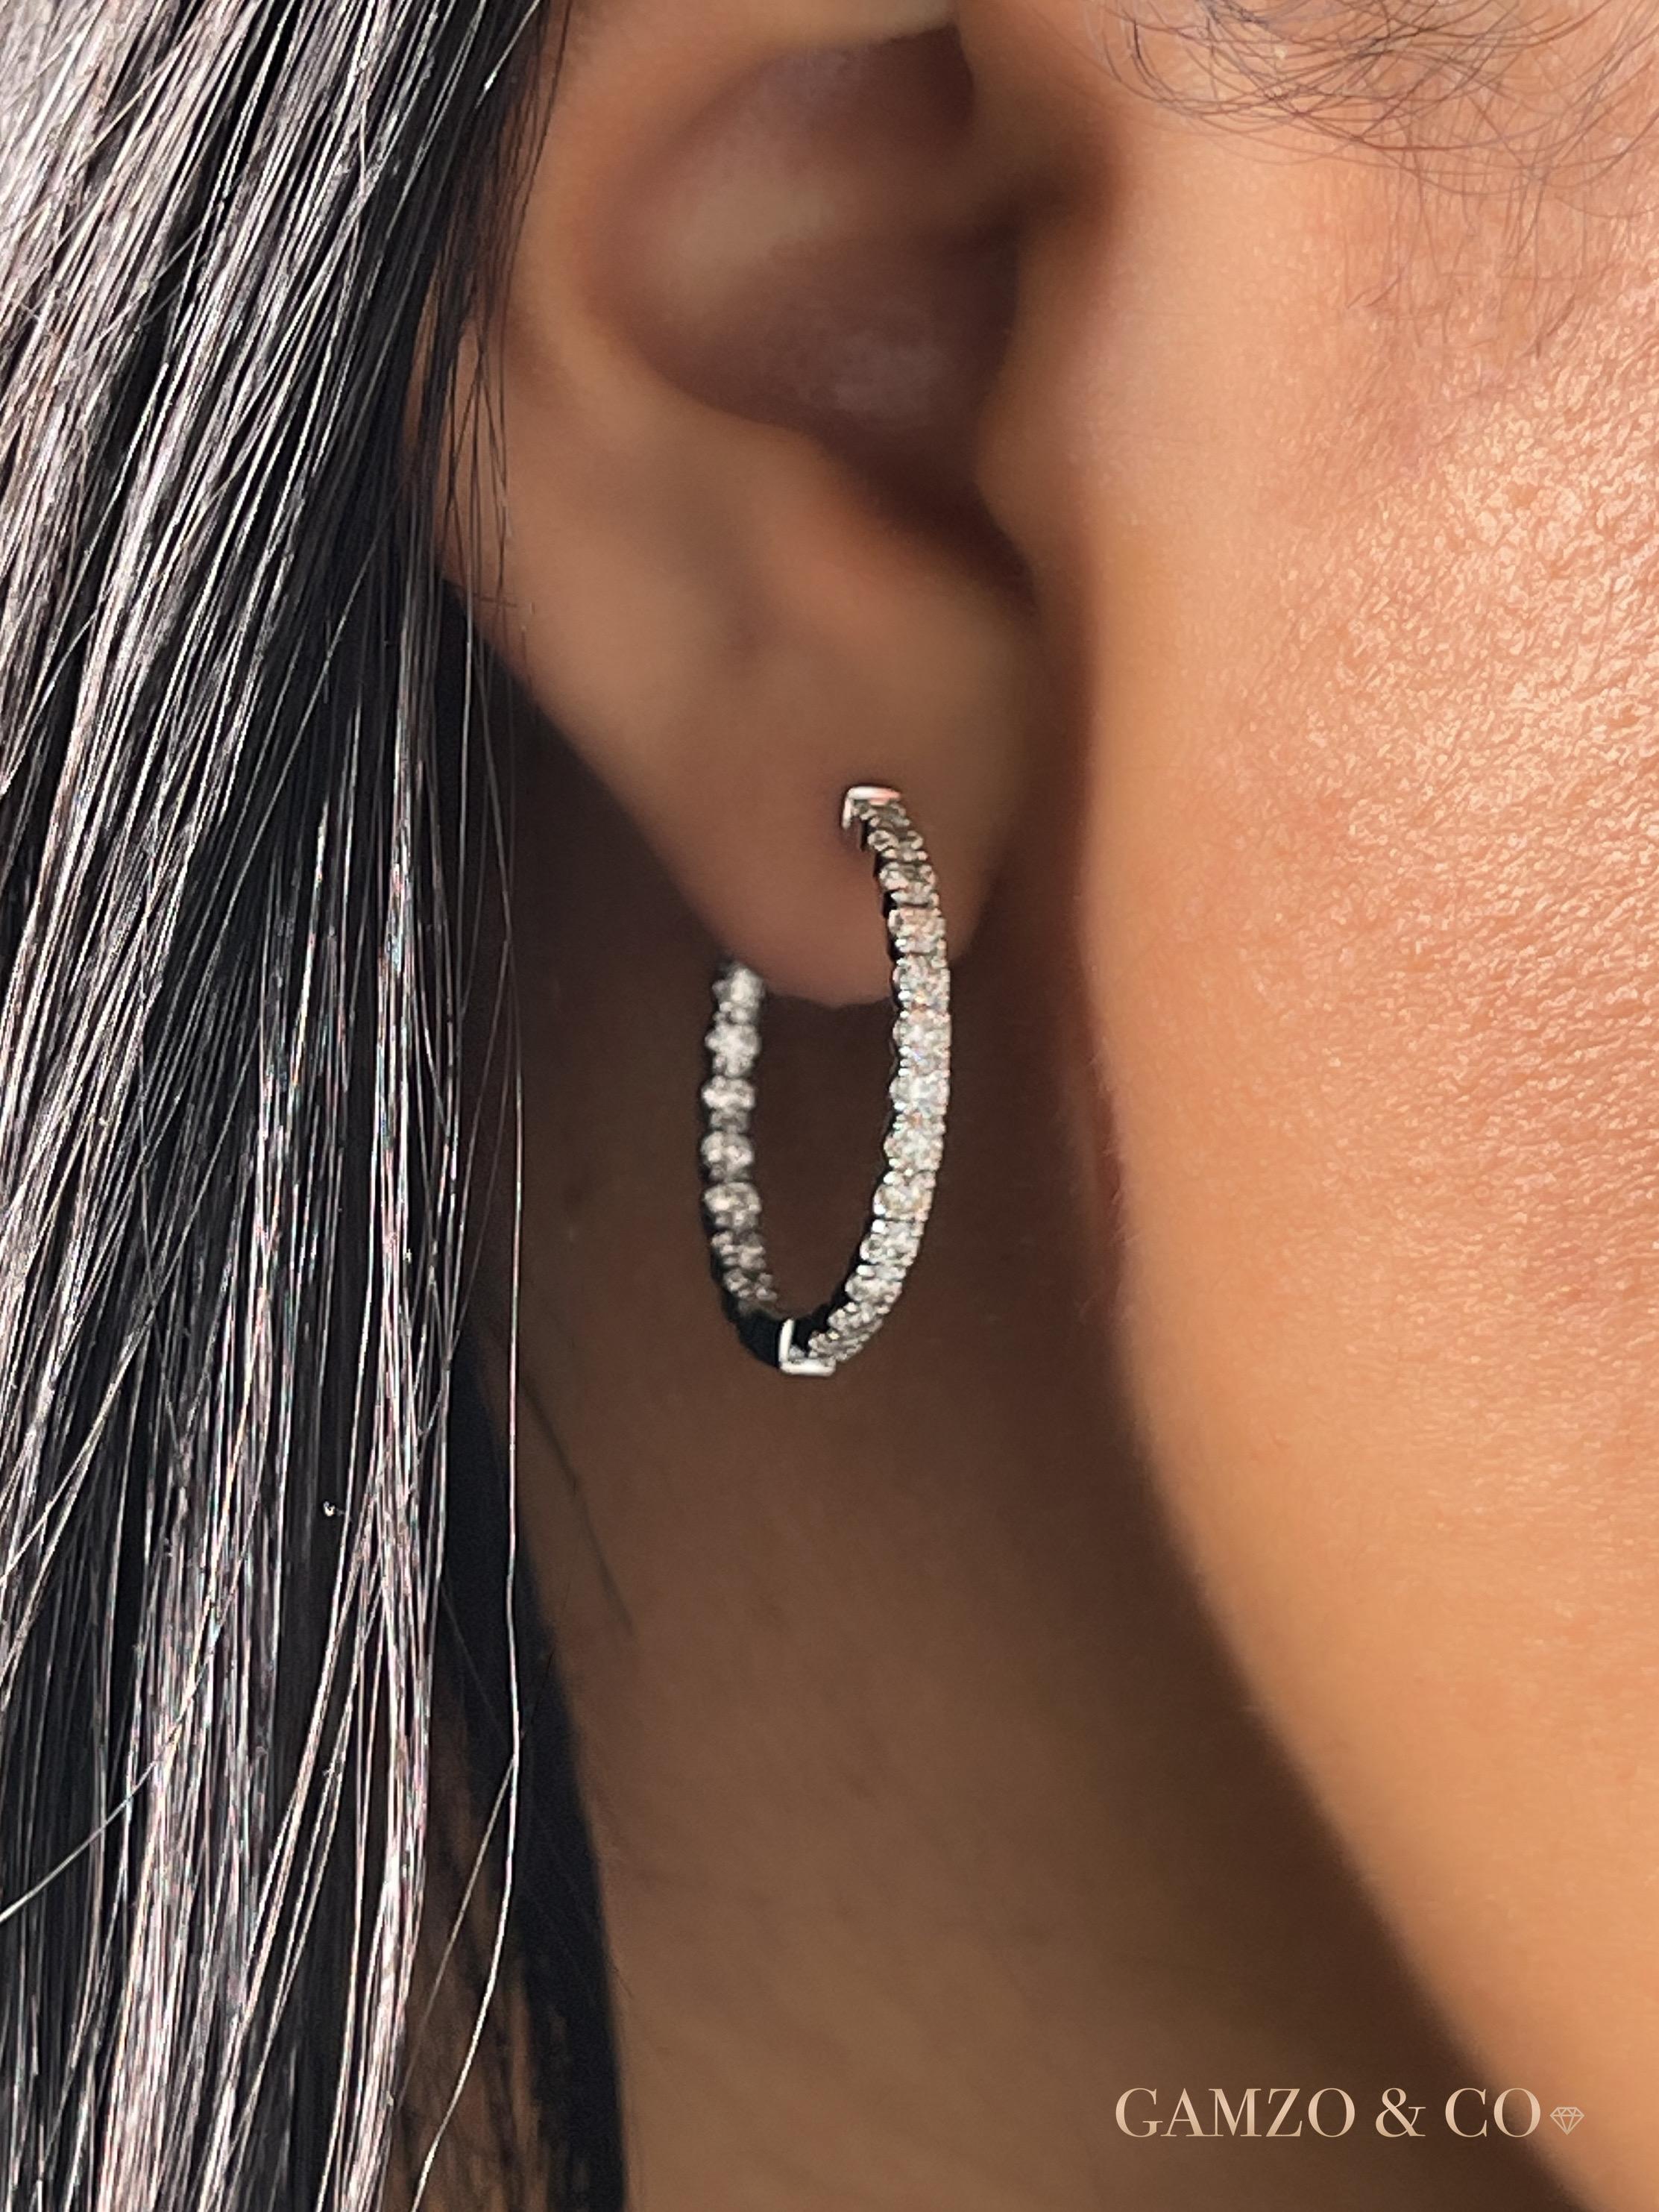 These inside out diamond hoop earrings feature beautiful round diamonds set in a classic 14k gold setting.

Metal: 14k Gold
Diamond Carat Weight (Total for pair): 2ct
Diamond Cut: Round Natural Conflict Free Diamond 
Diamond Clarity: VS
Diamond